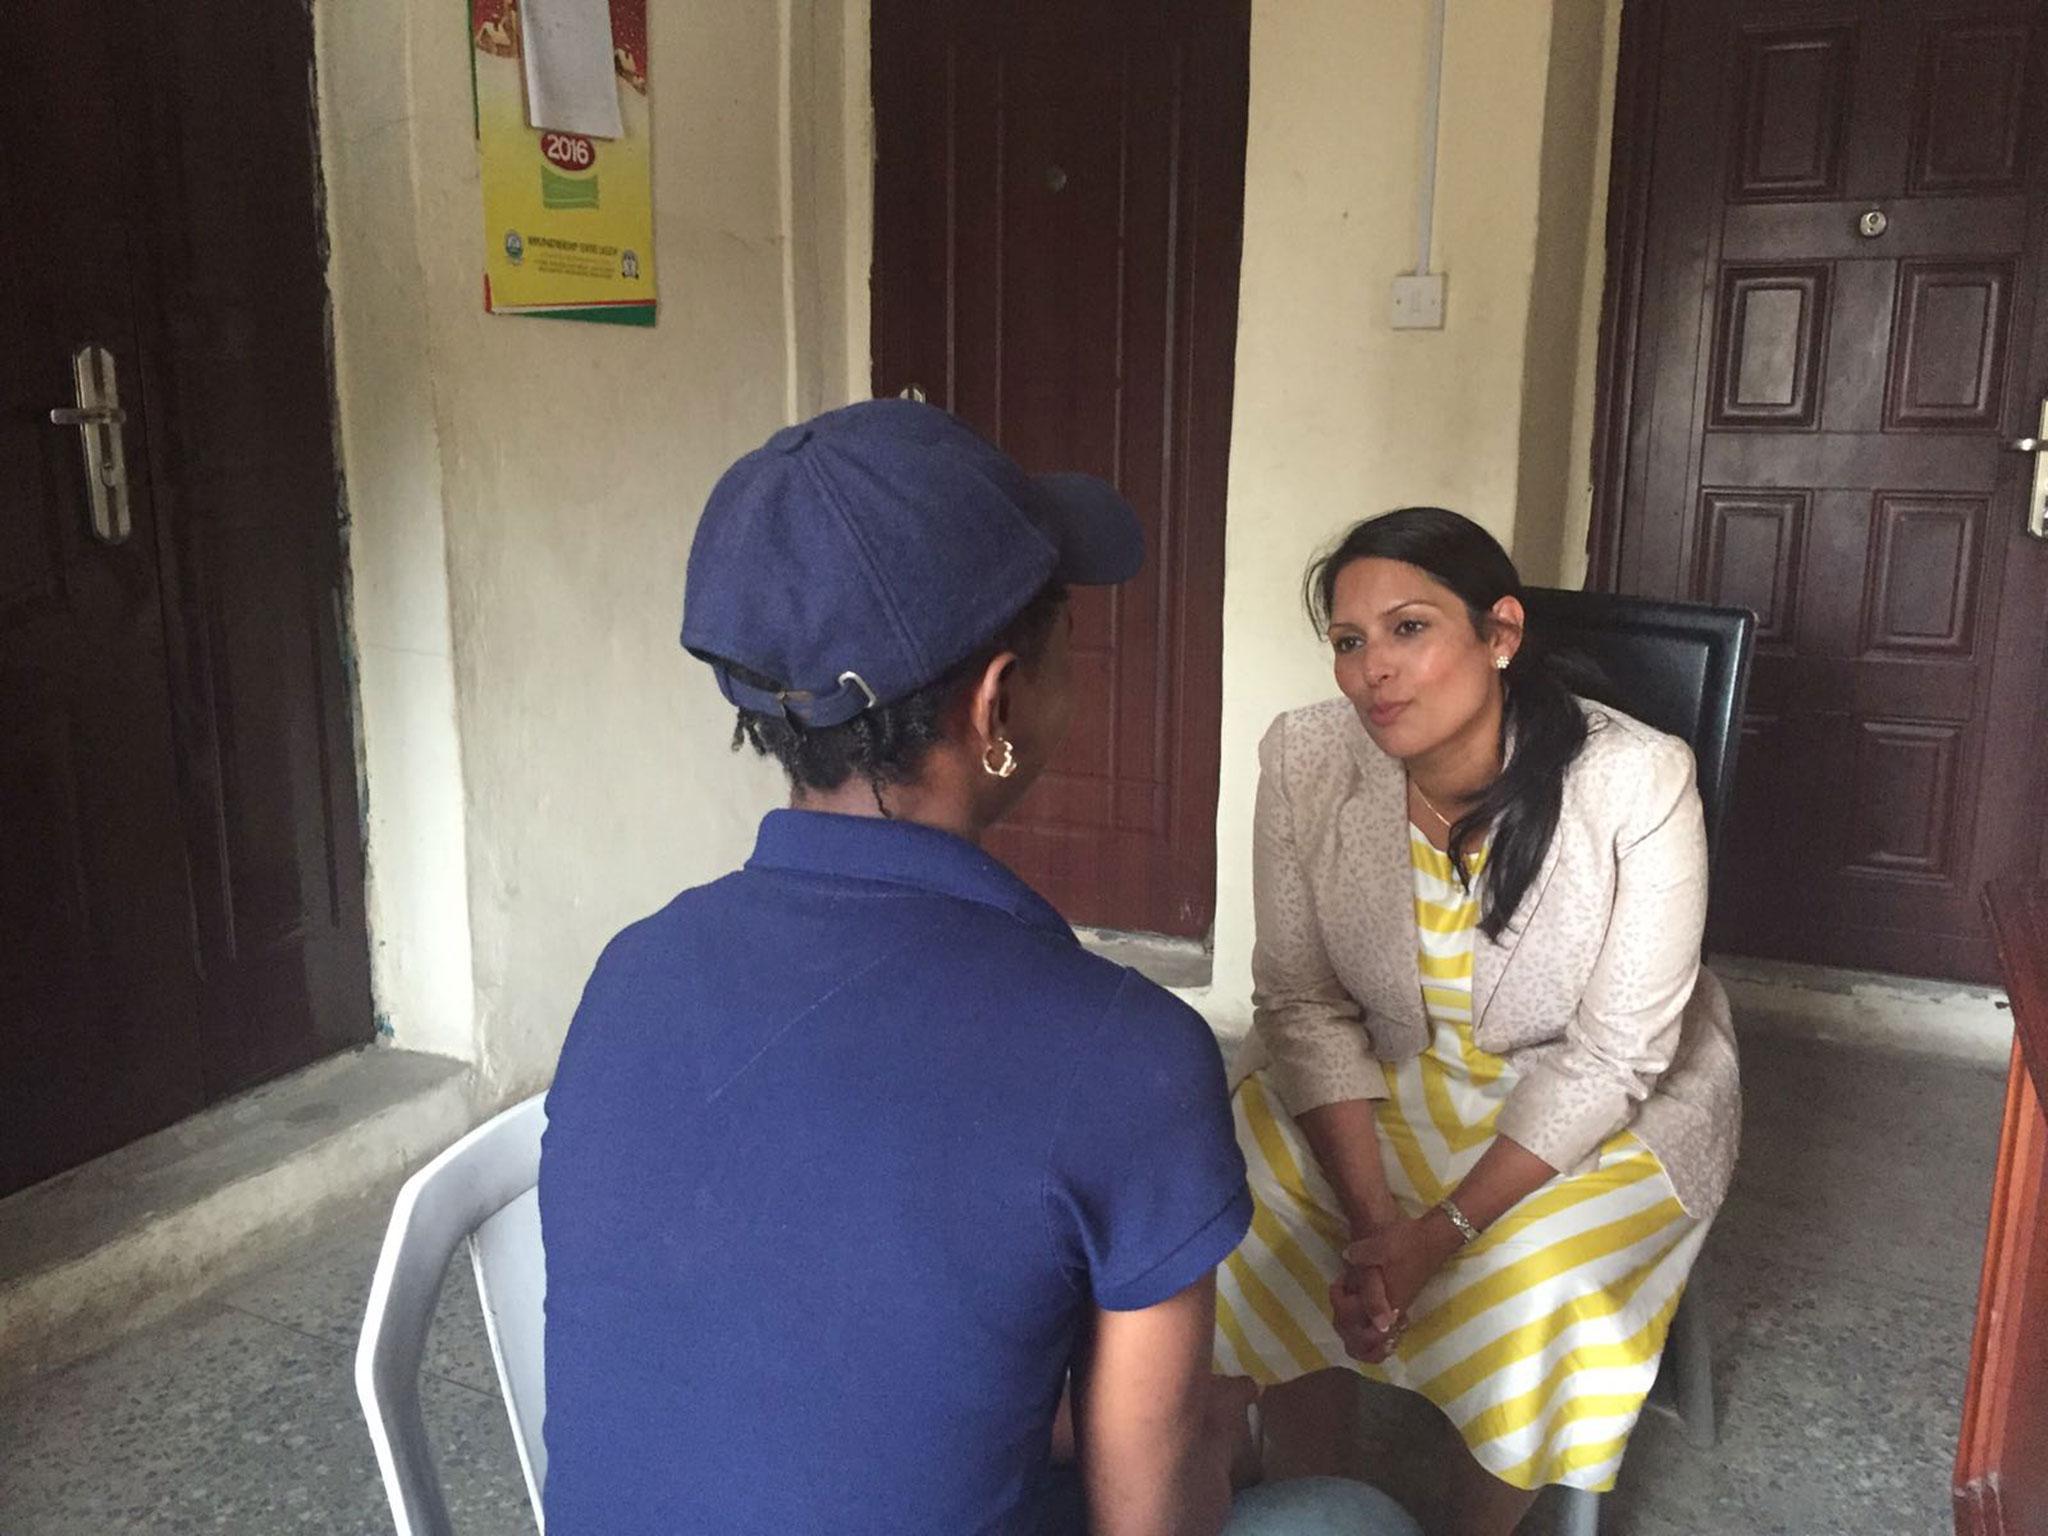 Priti Patel meets a woman in the Lagos safe house. The Department for International Development has pledged £7m to investigate how to combat trafficking between Britain and Nigeria